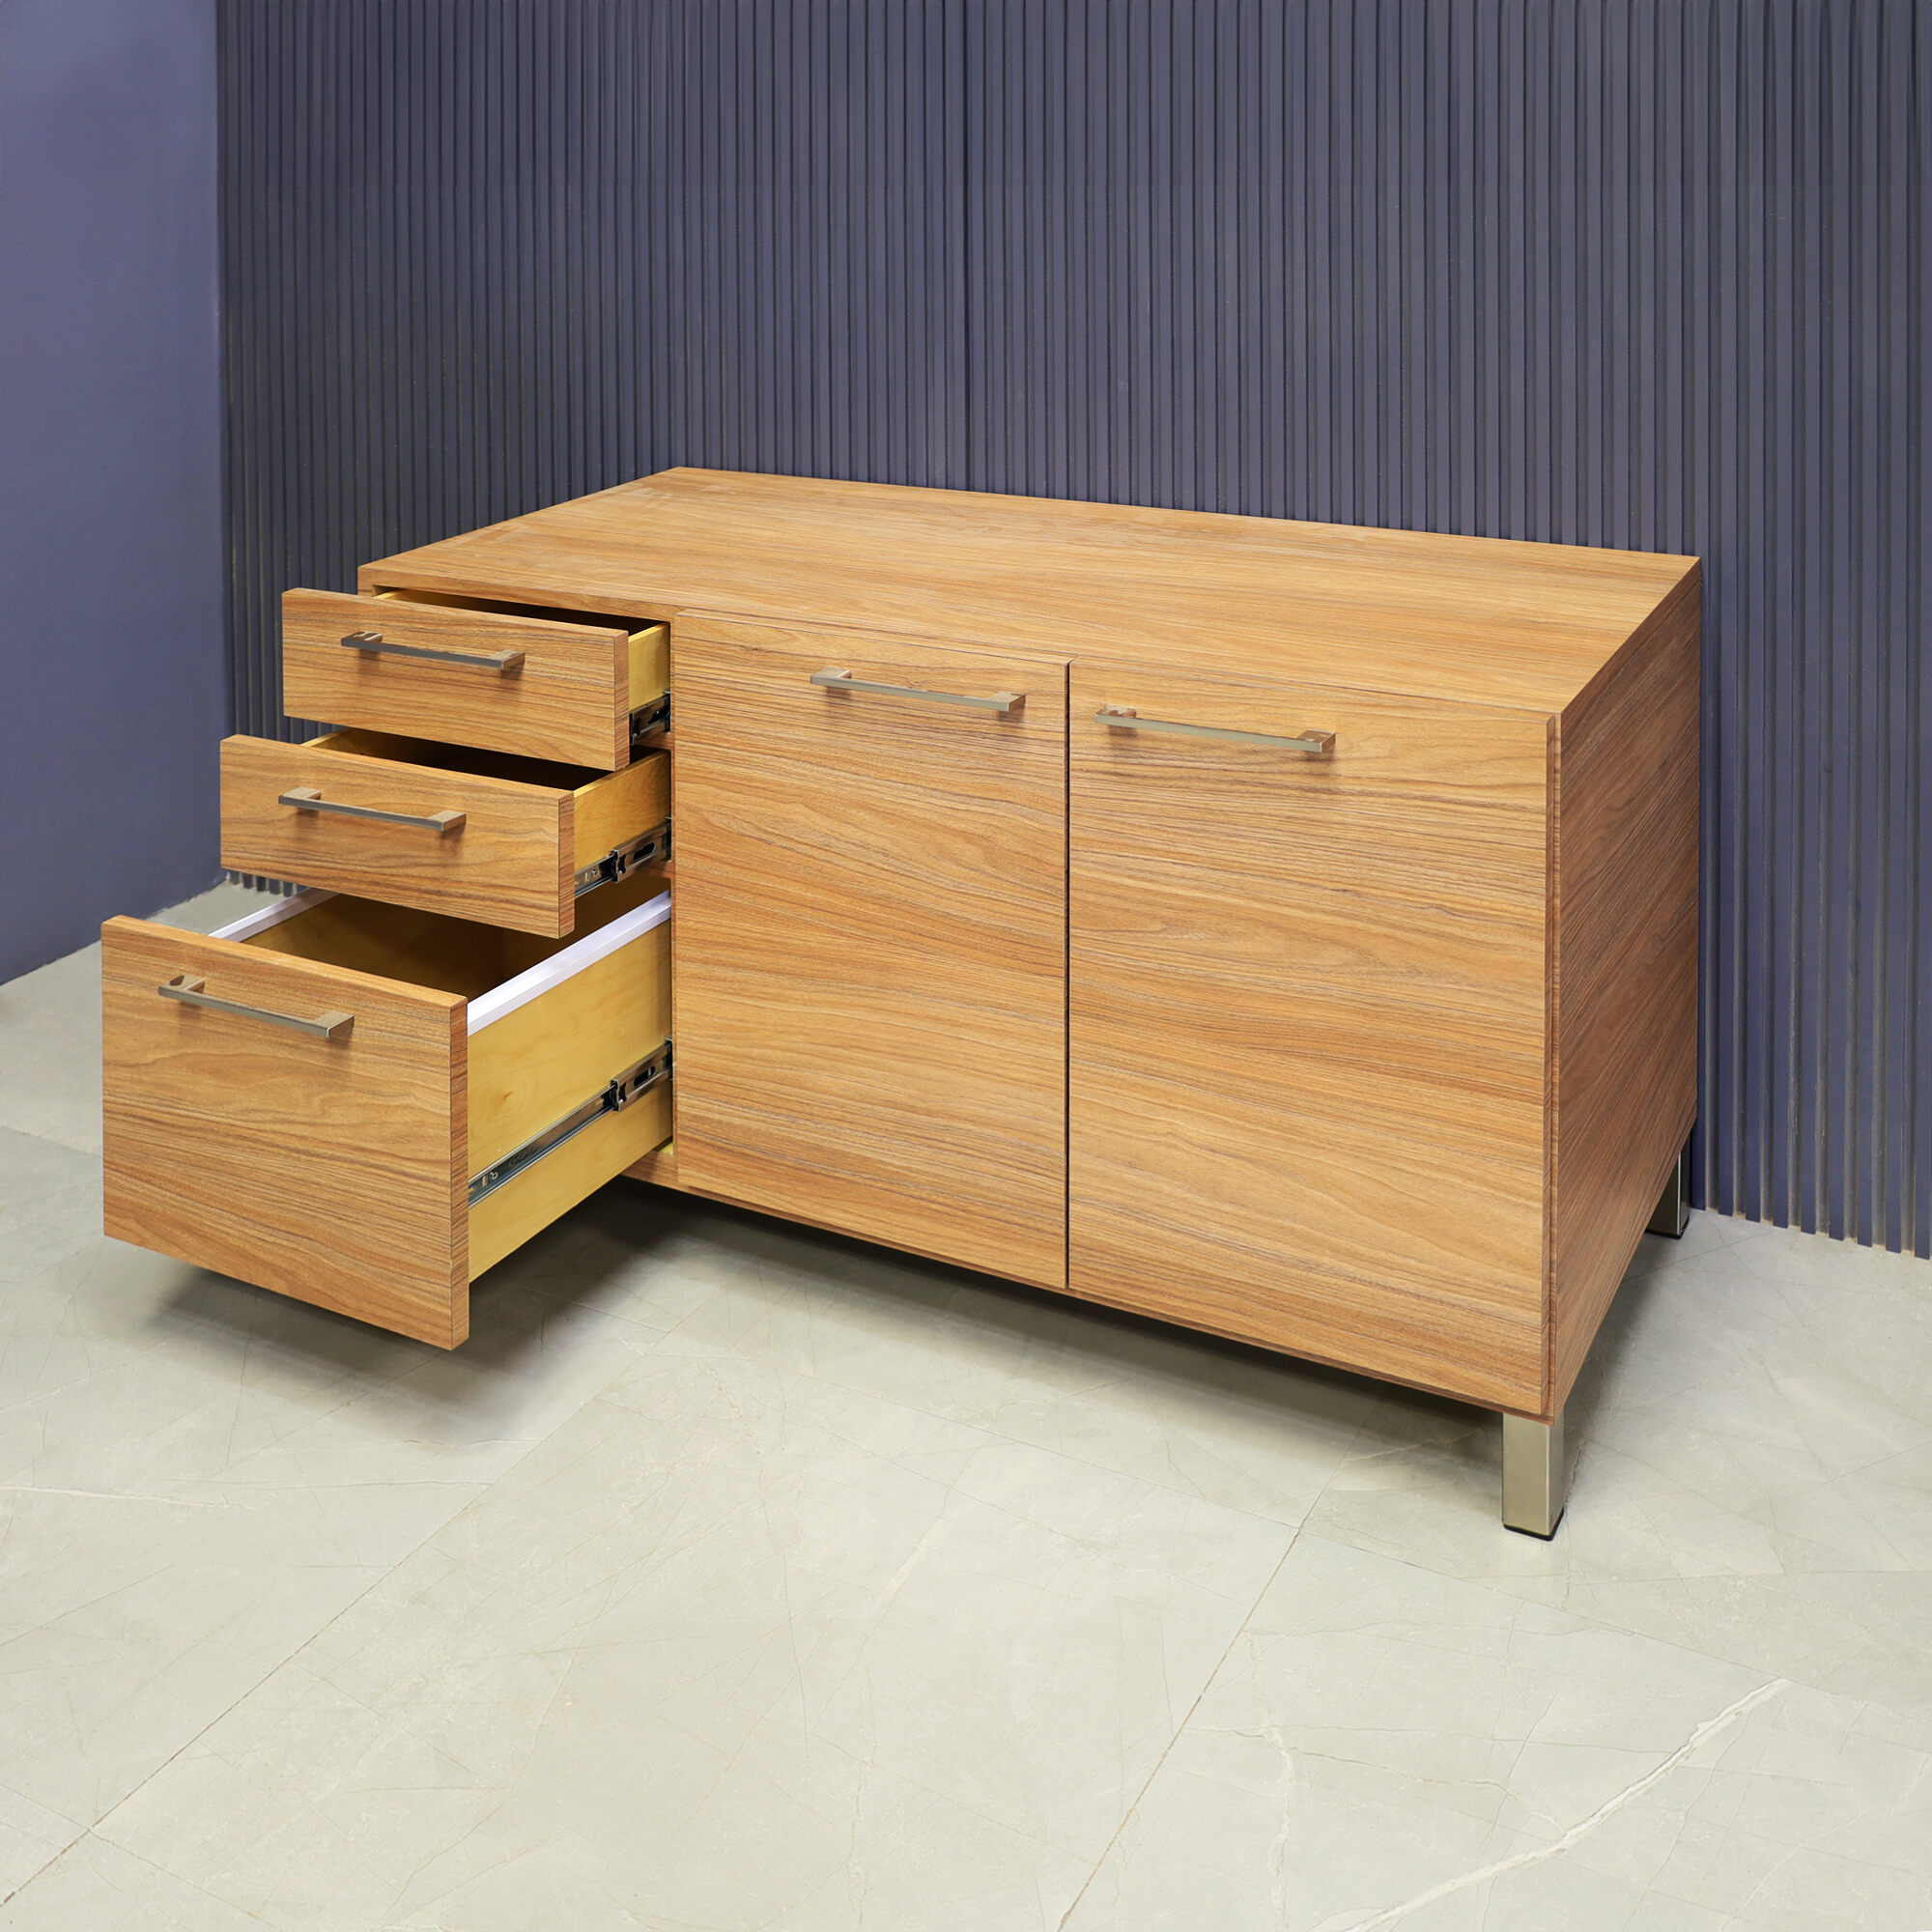 47-inch Naples Custom Storage Credenza in uptown walnut matte laminate credenza, front drawers & doors and brushed stainless steel legs and handles, shown here.